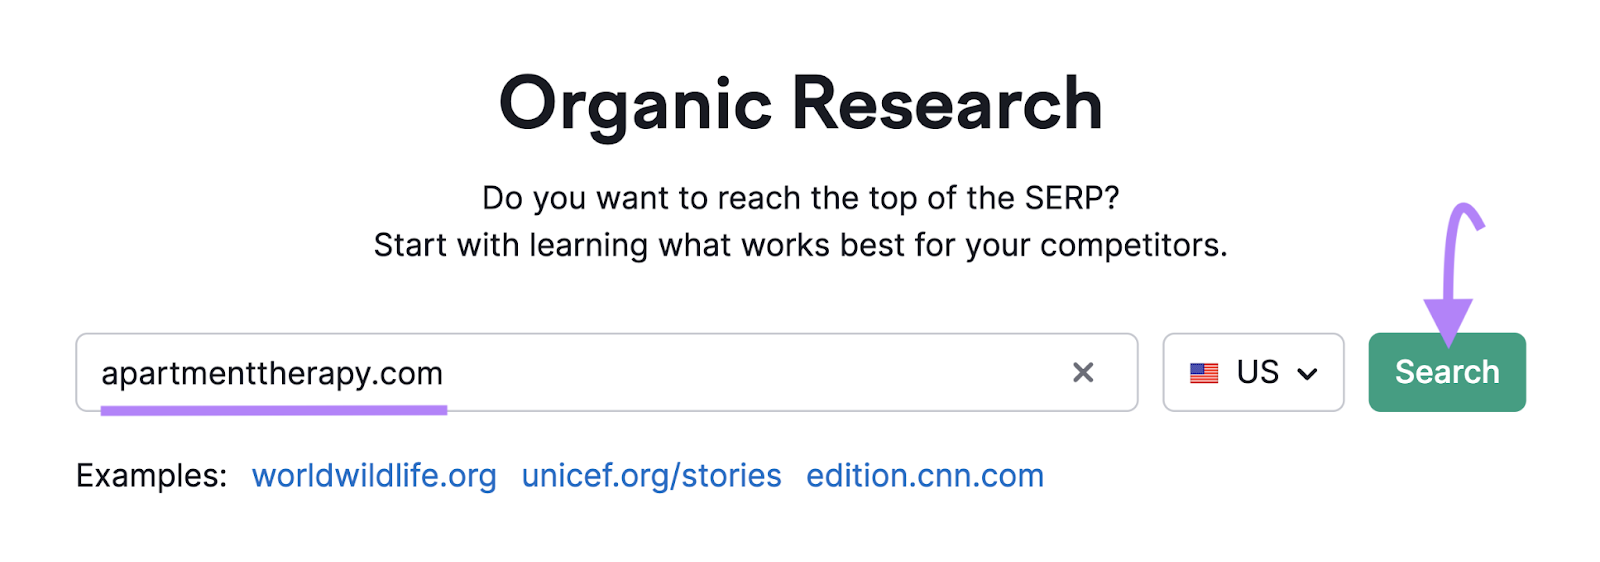 "apartmenttherapy.com" entered into the Organic Research search bar